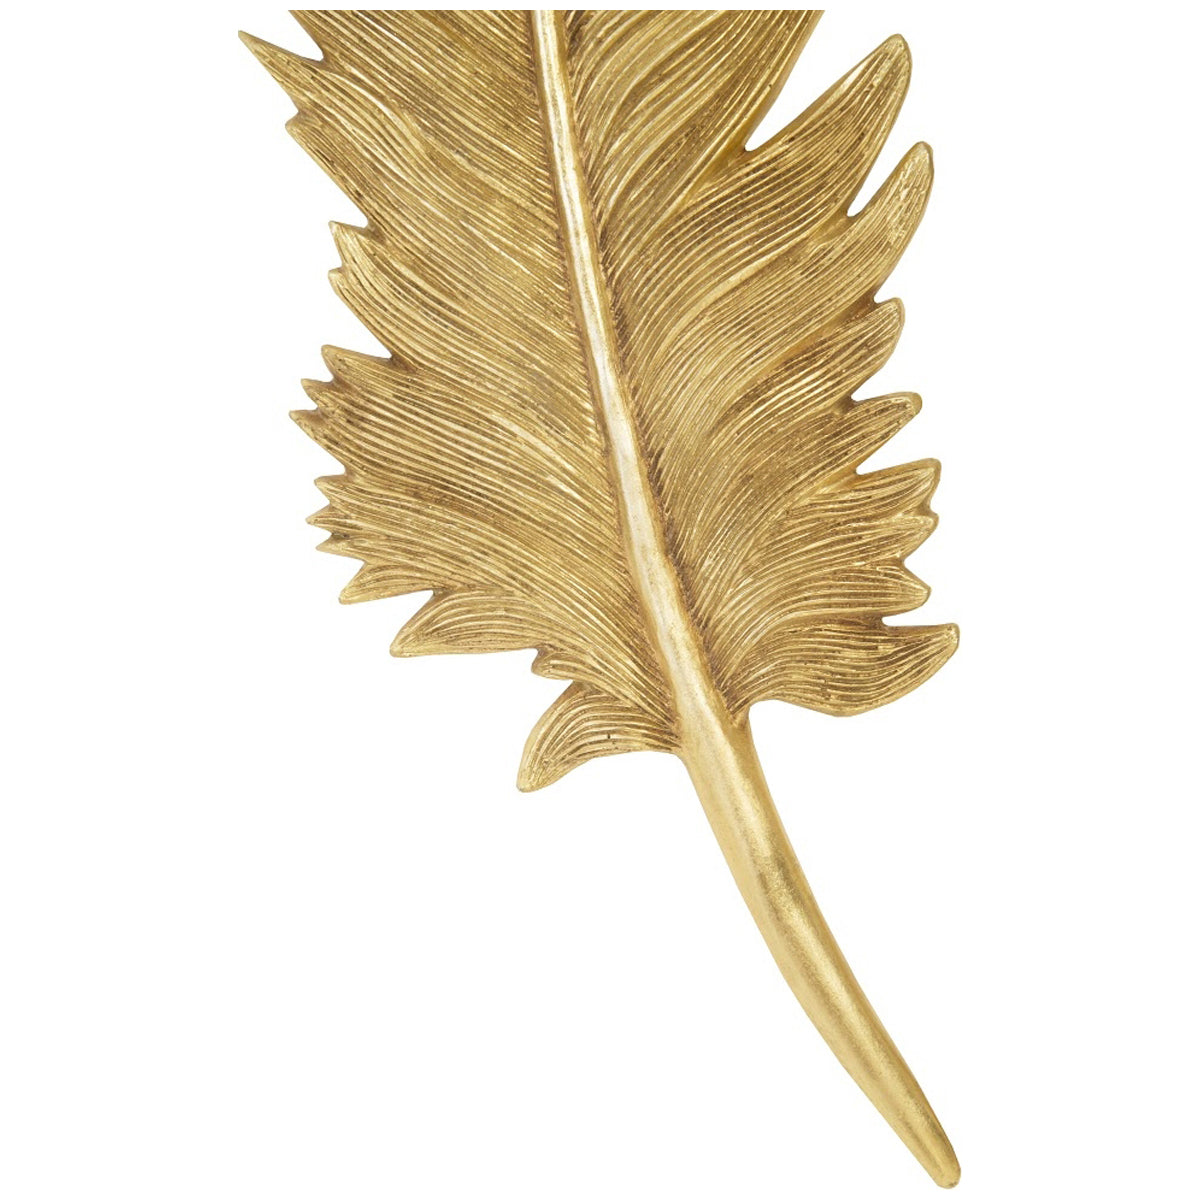 Phillips Collection Feathers Large Wall Art, 2-Piece Set